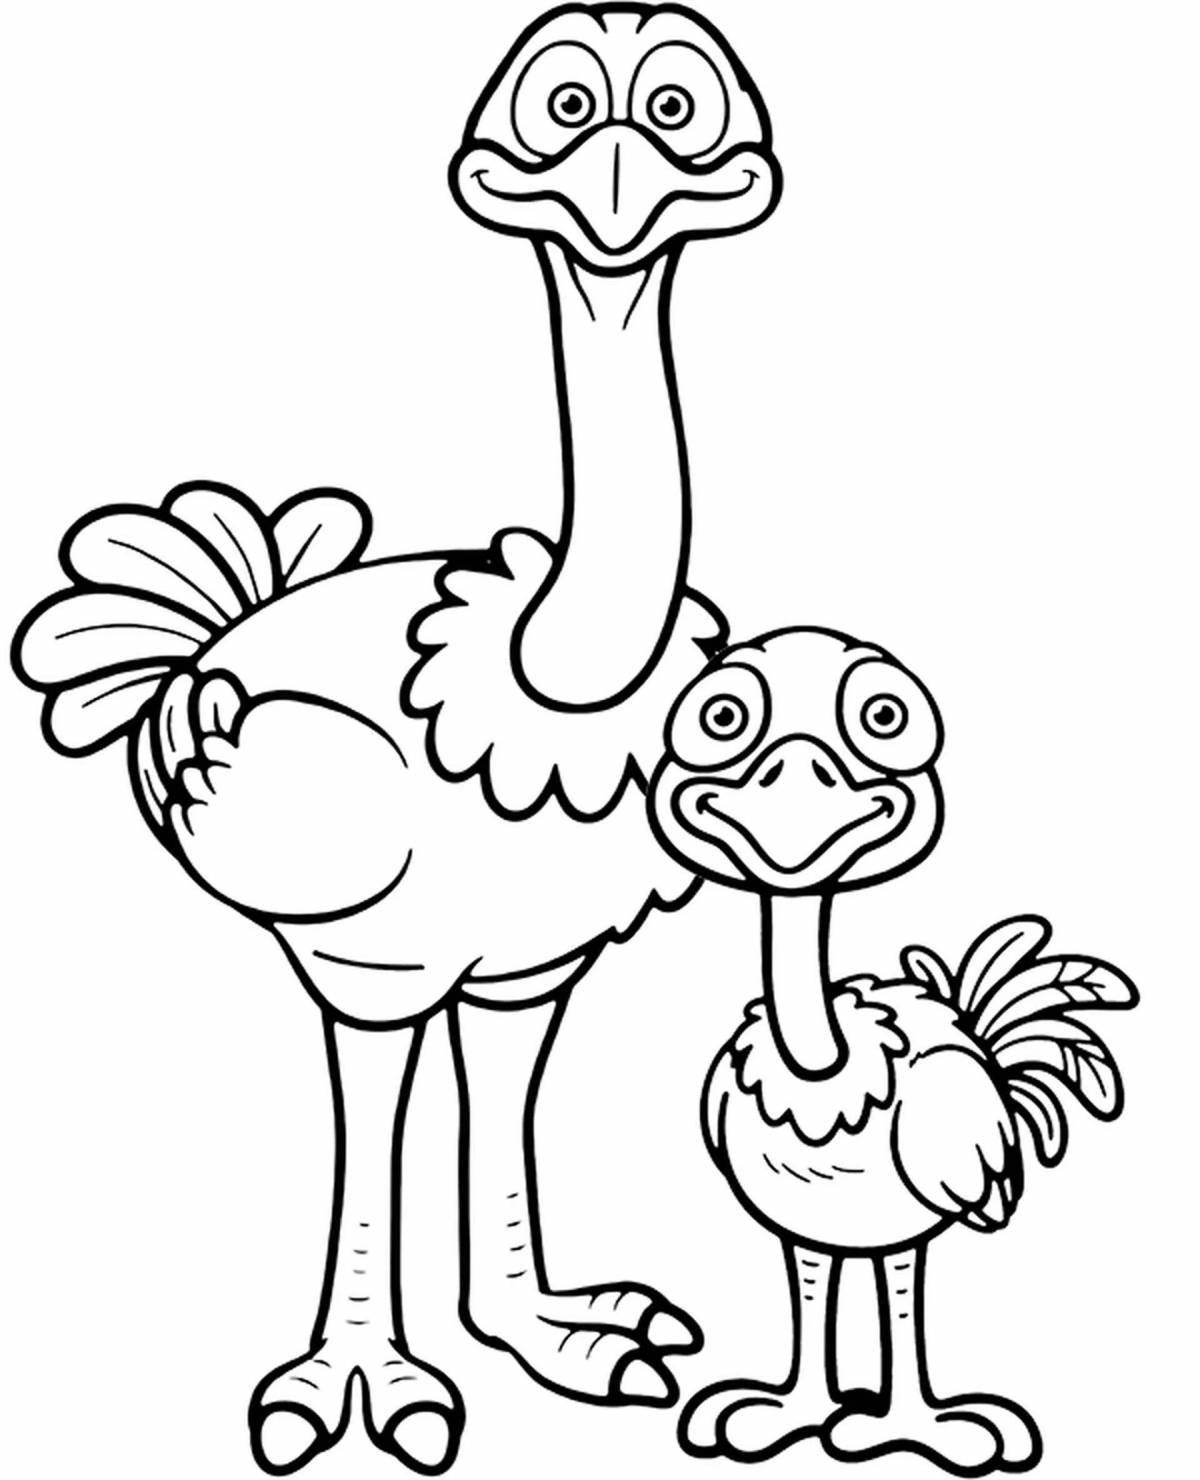 Fancy ostrich coloring for kids